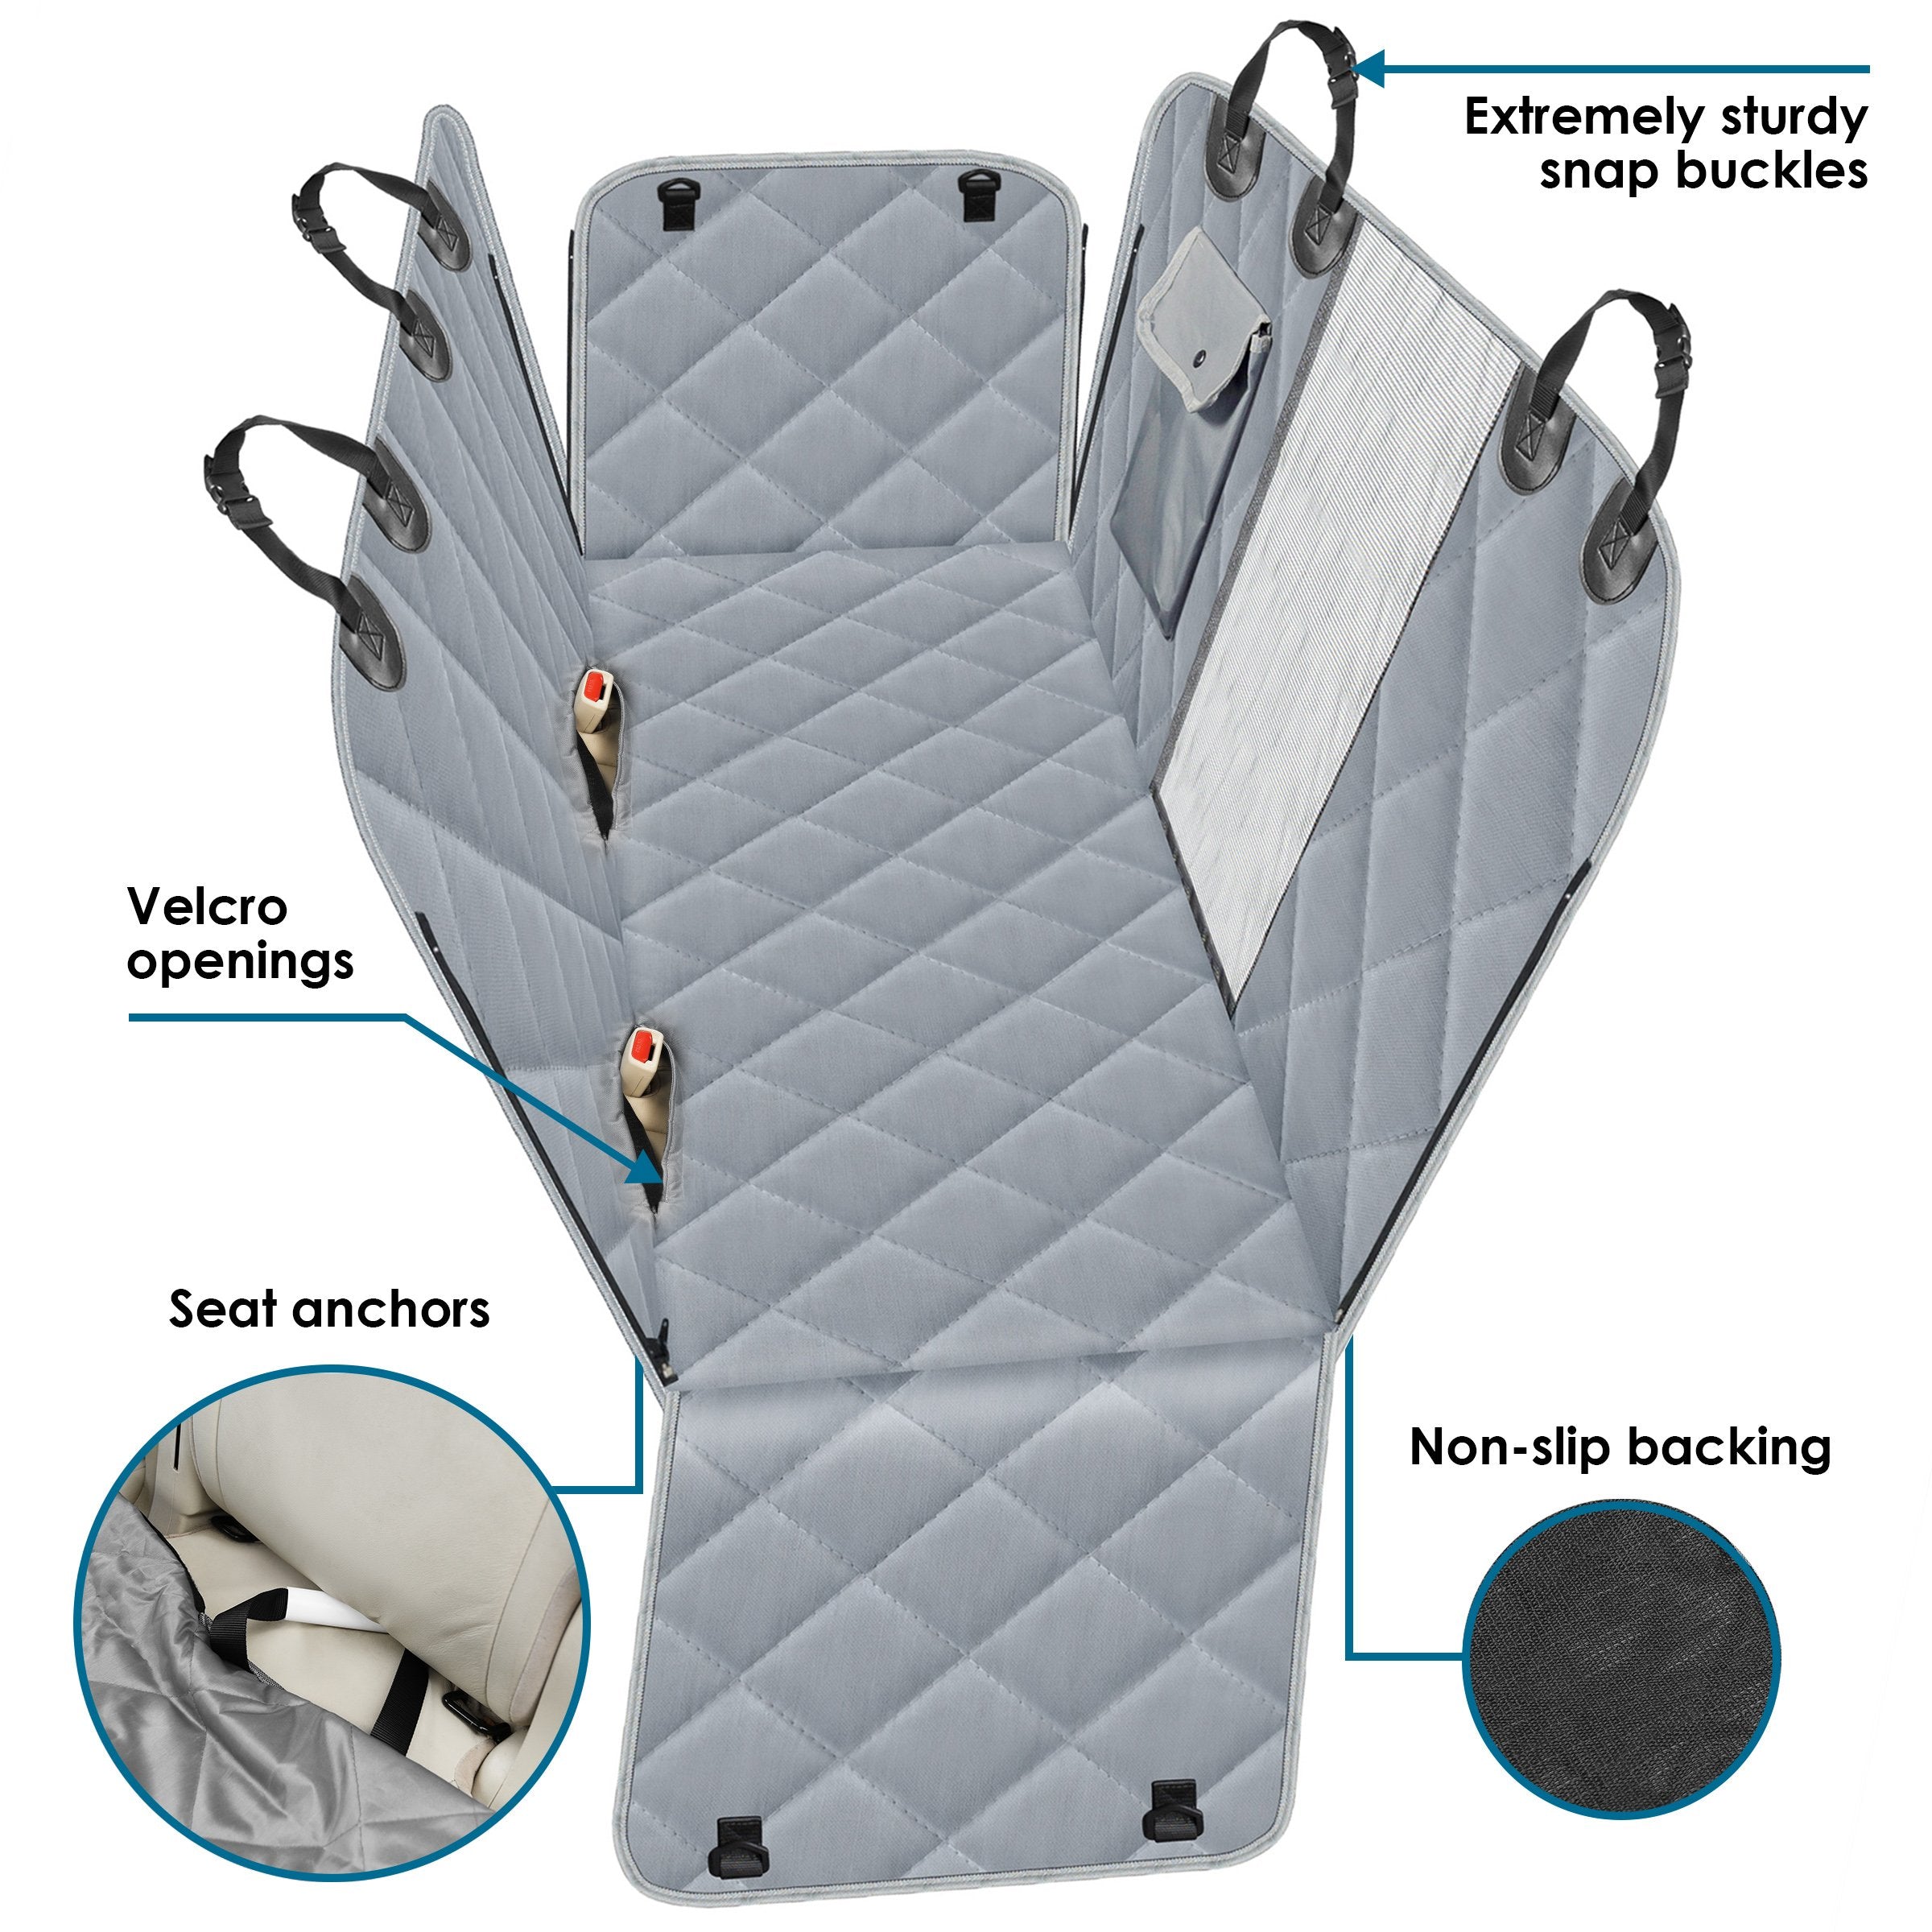 Dog Car Seat Cover for Back Seat, Durable Anti-Scratch Nonslip